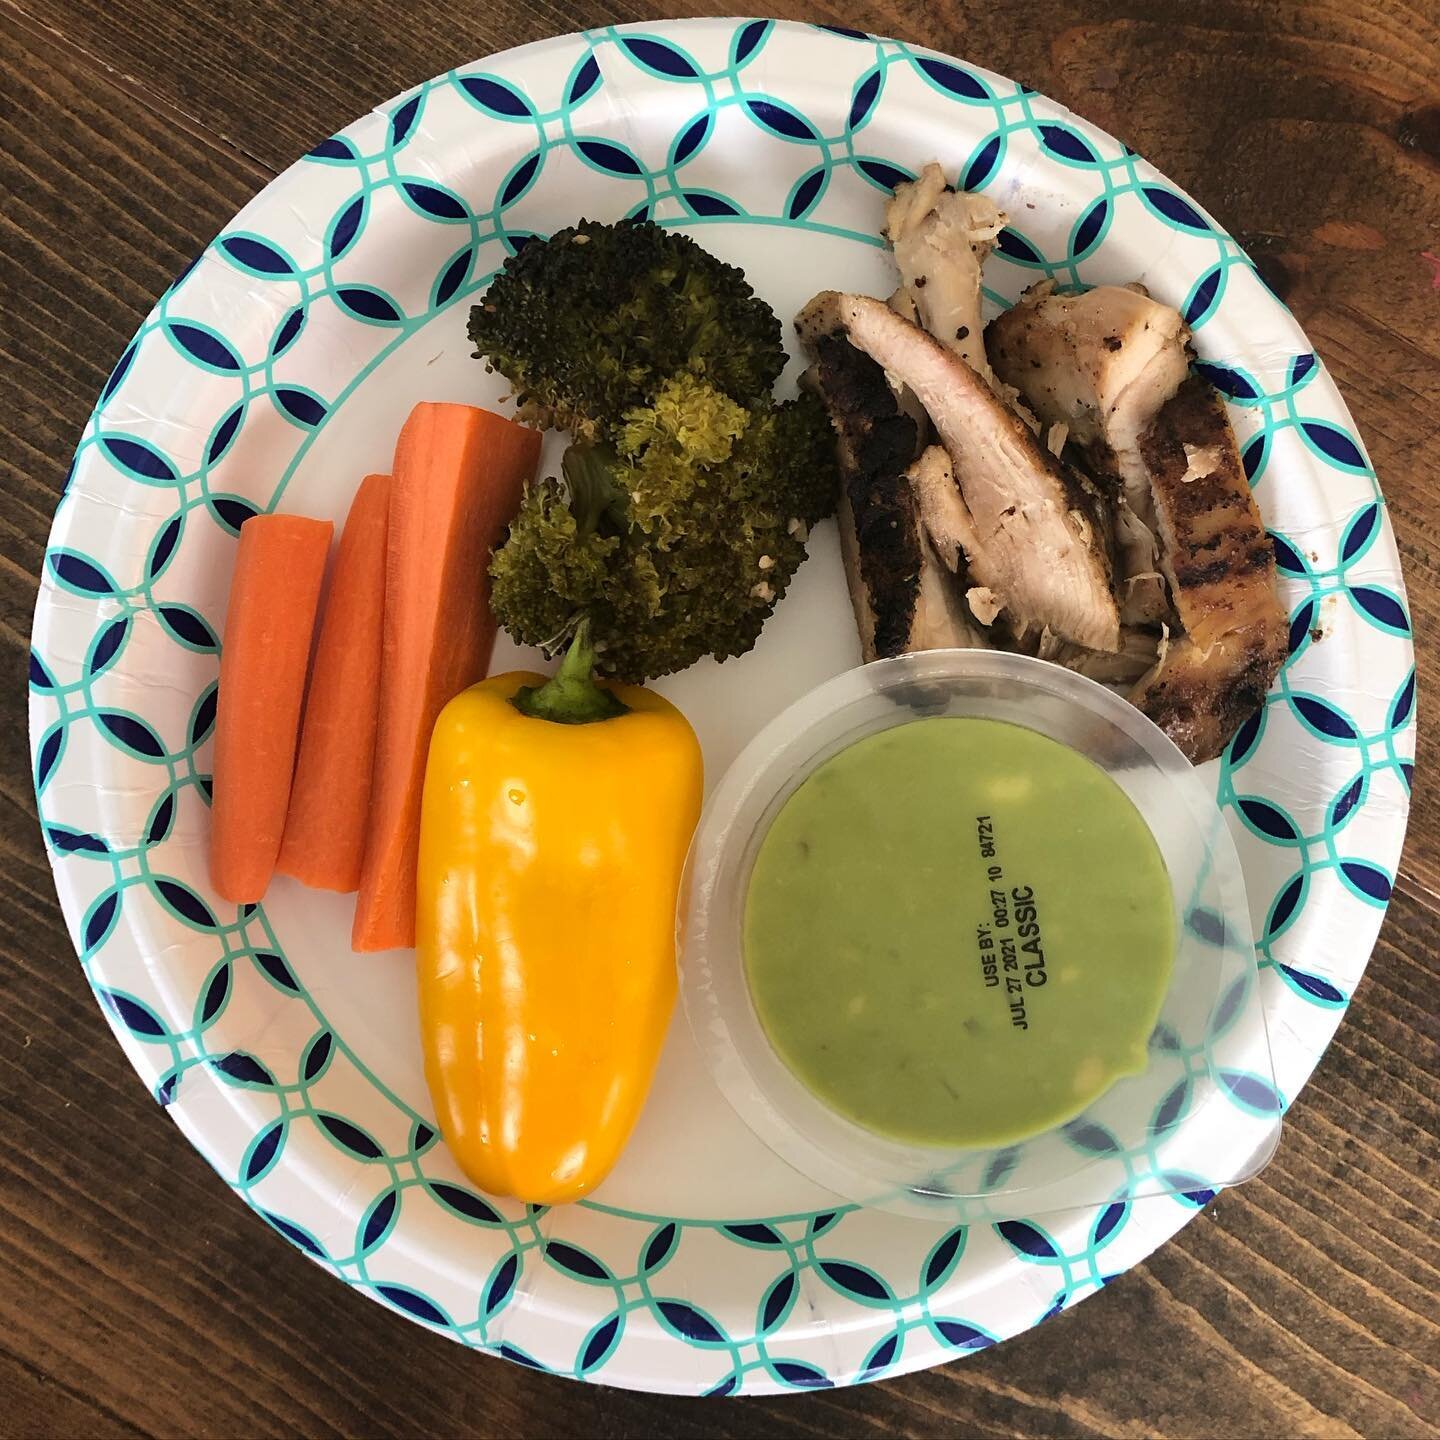 Simple lunch today:
- chicken thigh strips
- roasted broccoli 
- carrots and pepper with guacamole 
.
Sometimes I feel guilty that we eat a lot of the same things, but then I remember how fortunate we are to eat three meals a day. Do you ever have mo